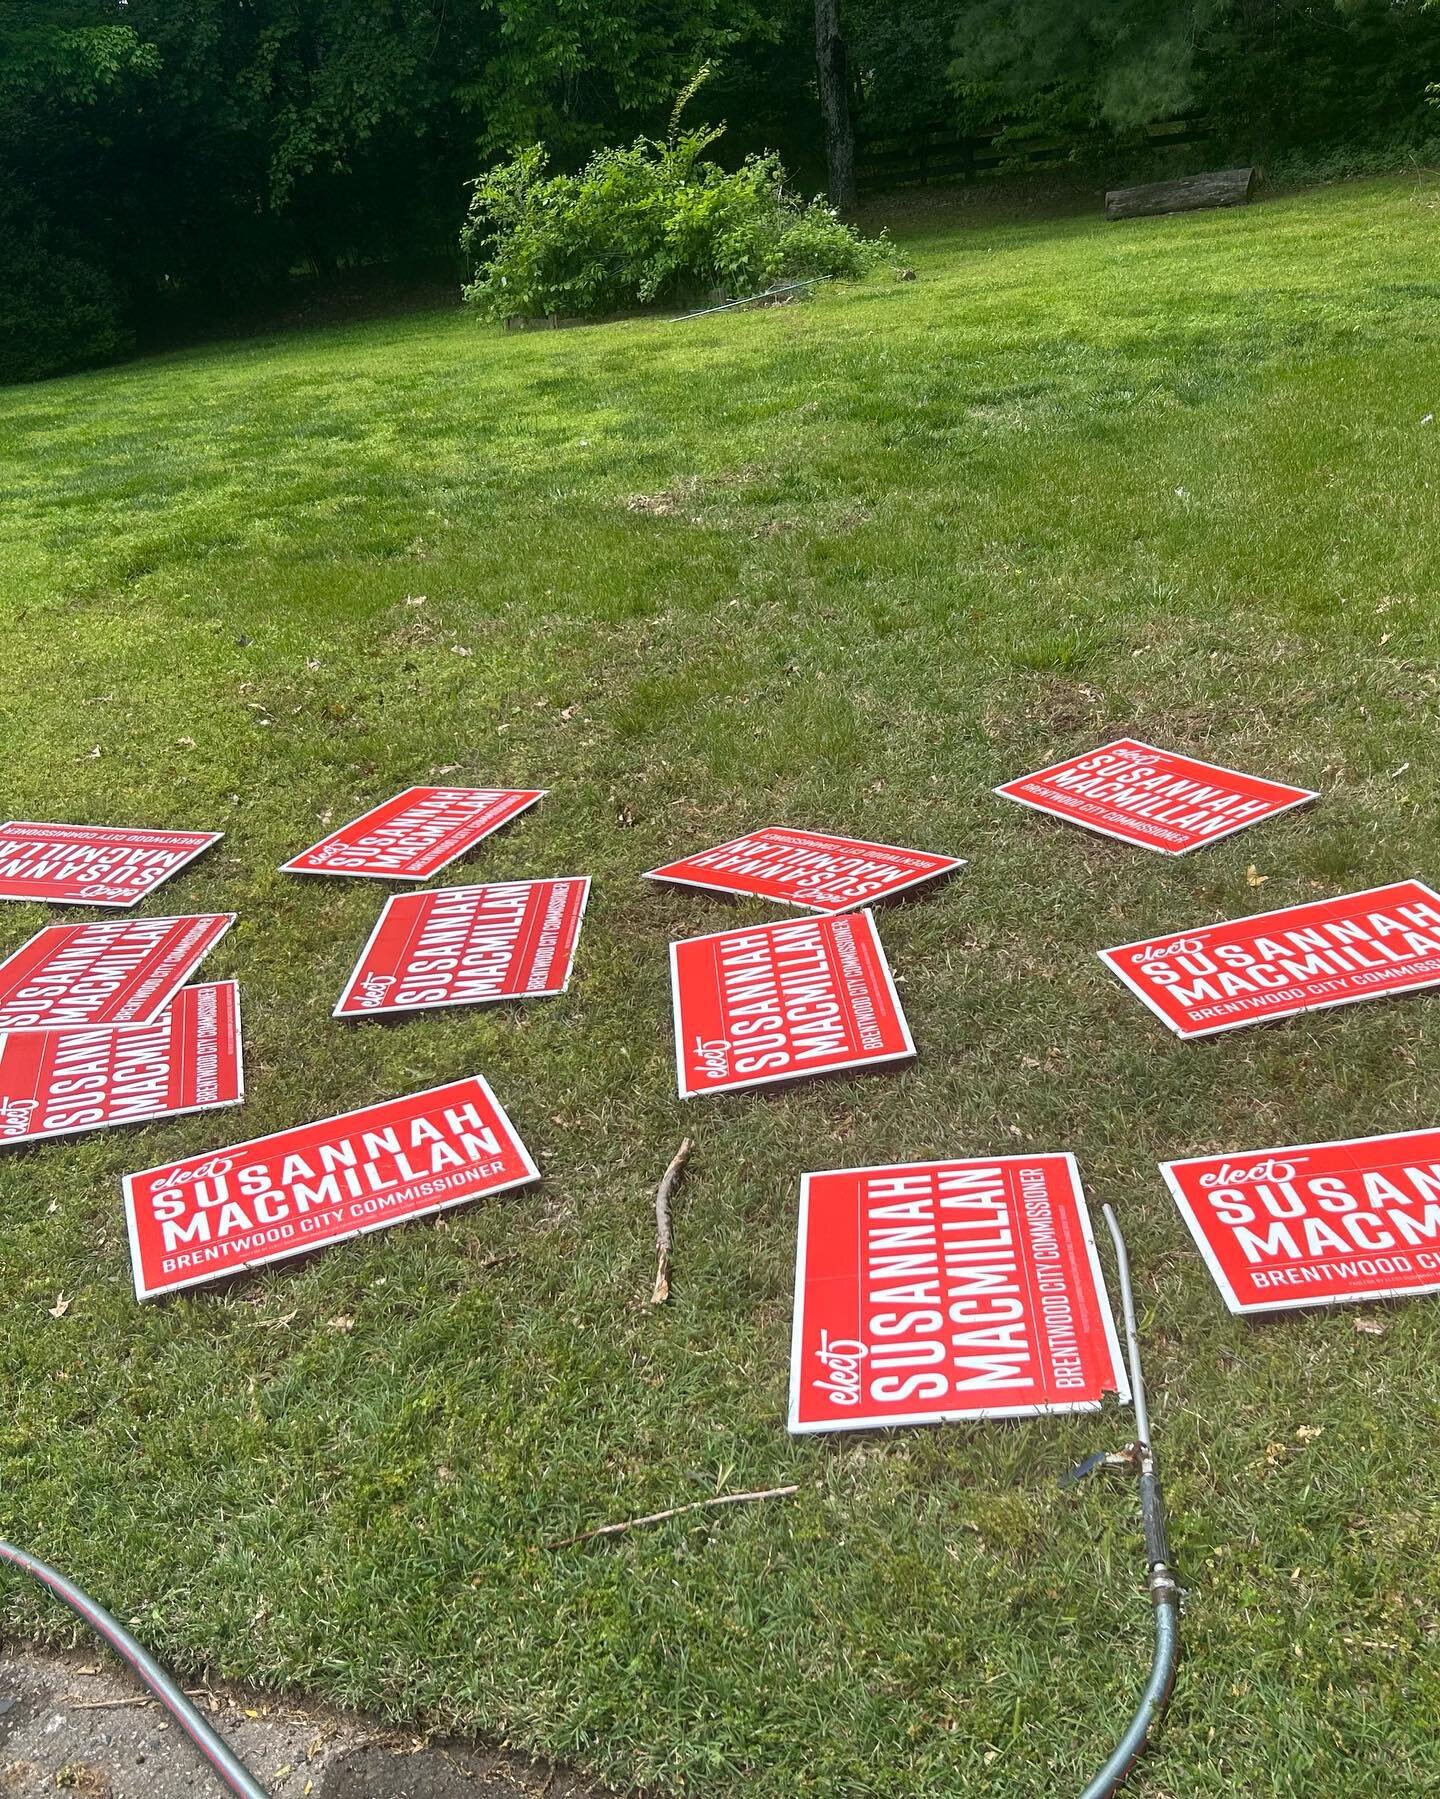 Weekend after being Re-elected: cleaning signs and leaning them anywhere I can find so they dry. Why? I&rsquo;ll reuse them in 4 years. I so appreciate the support of my donors and want to use their contributions wisely.